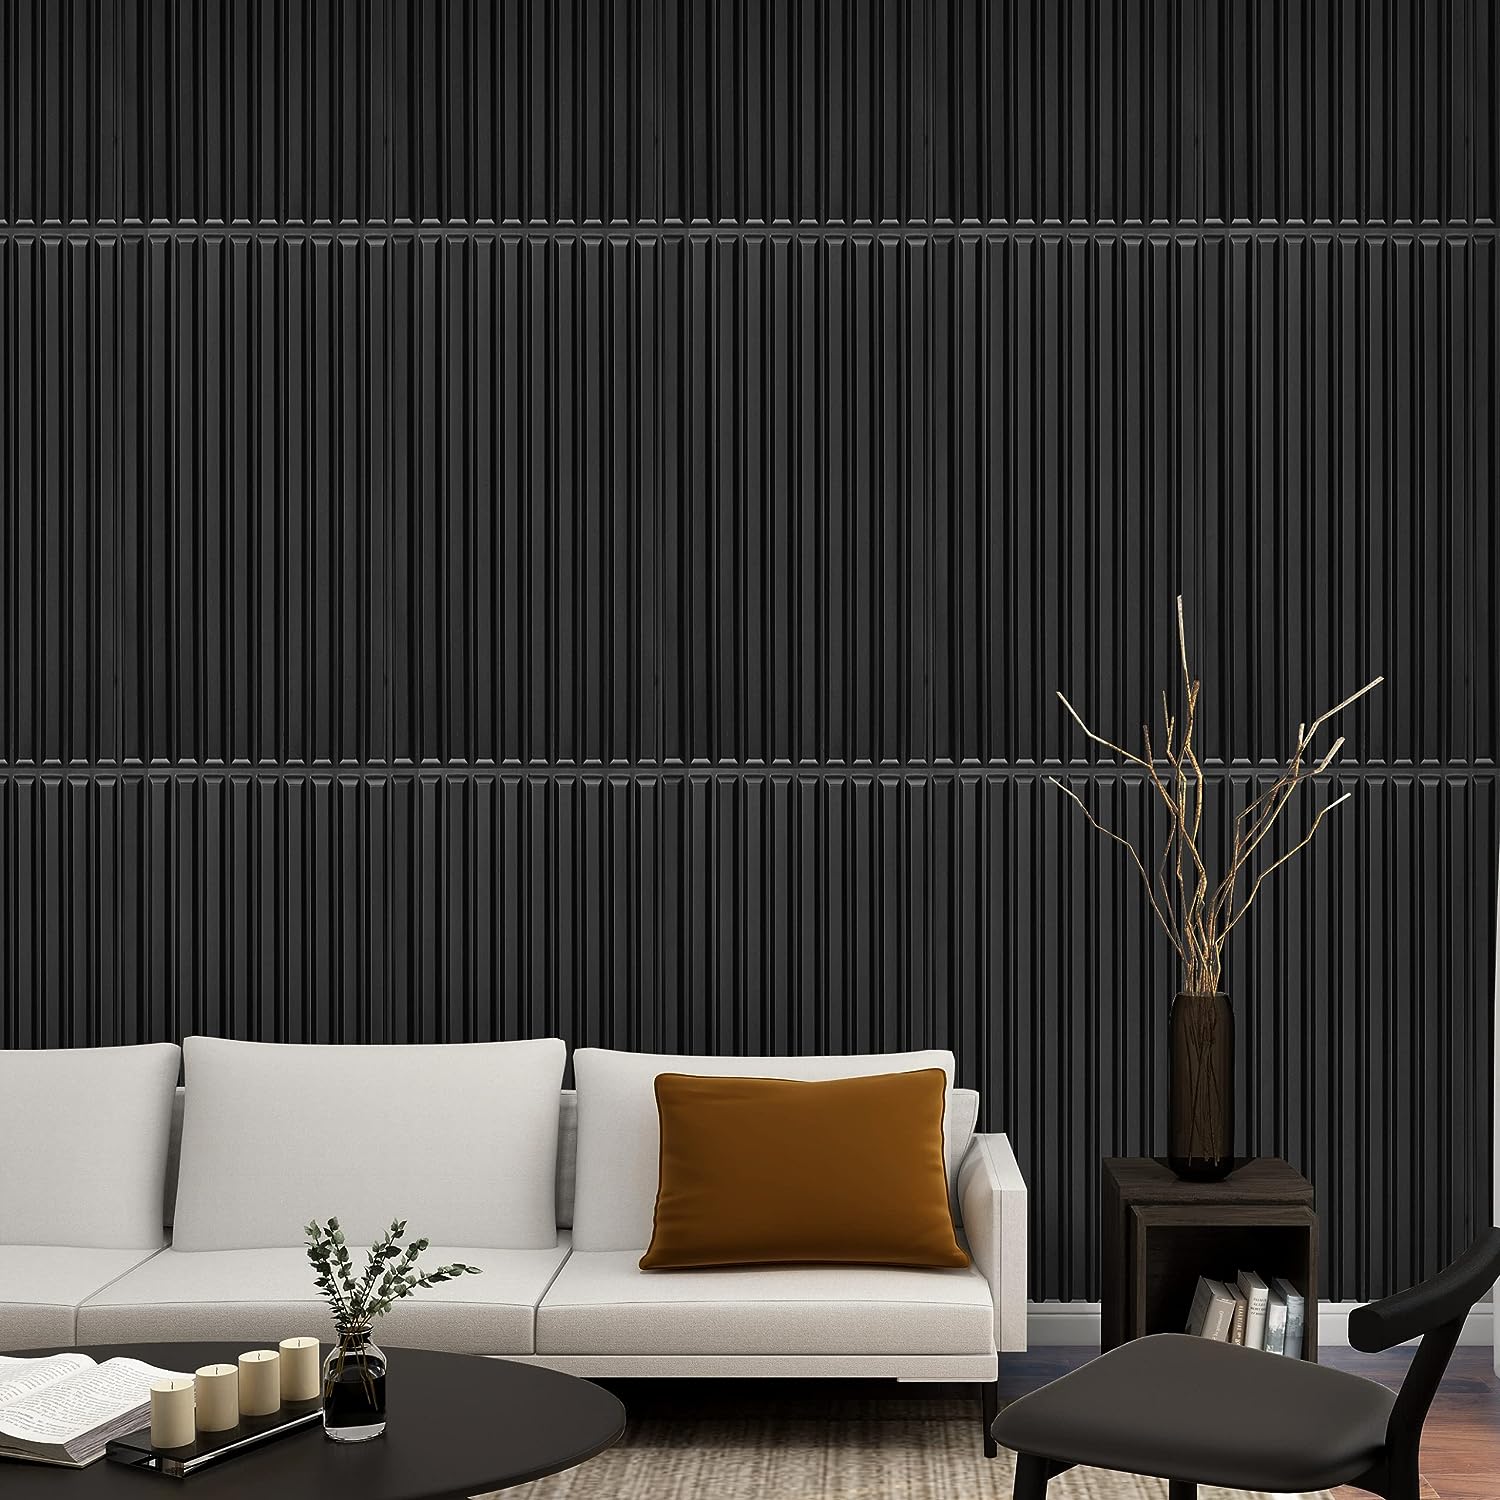 Textured Wall Paneling